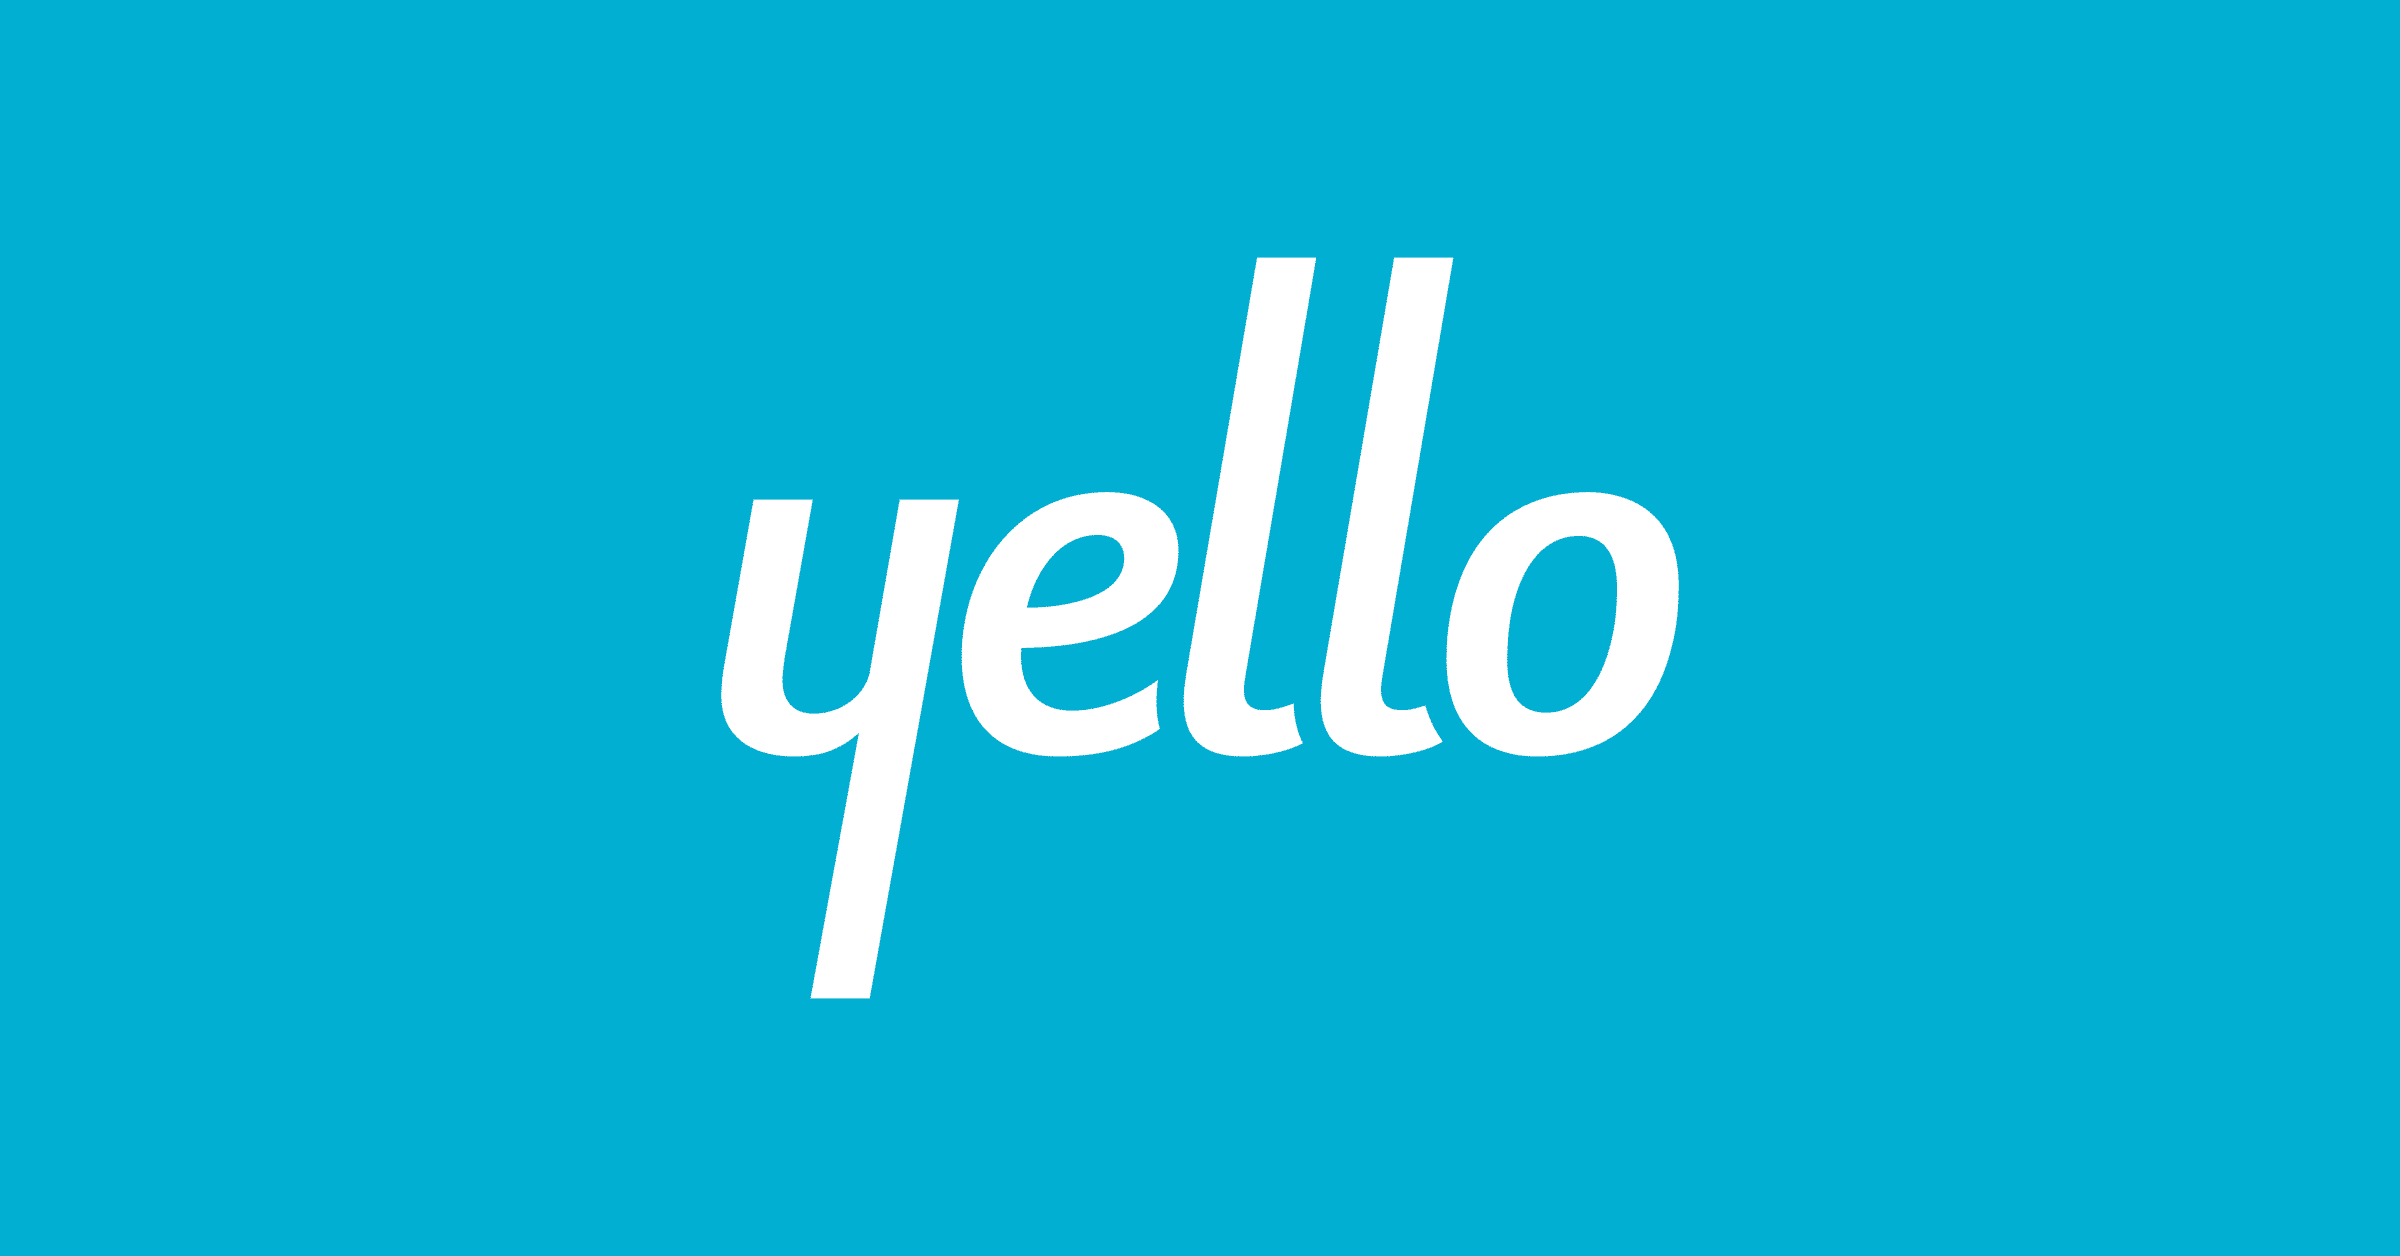 Our Customers - Yello